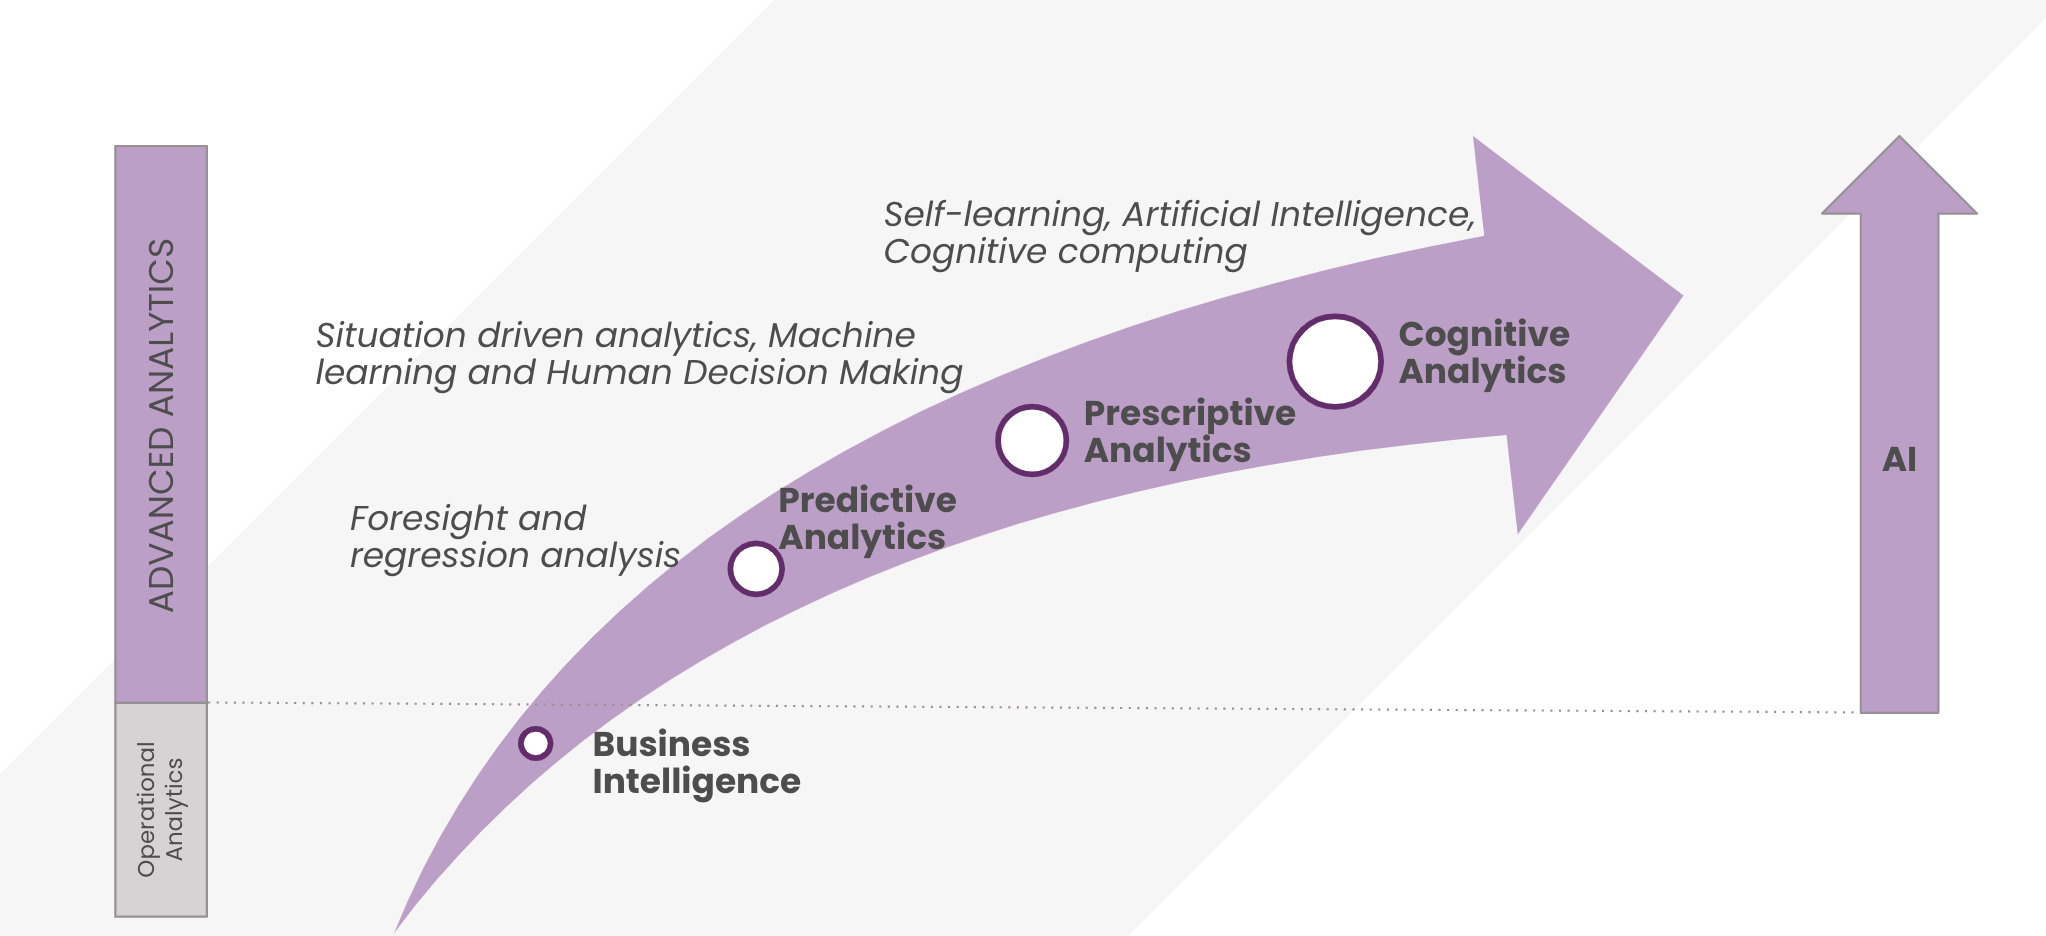 an arrow rising up and to the right showing how advanced analytics moves towards AI.